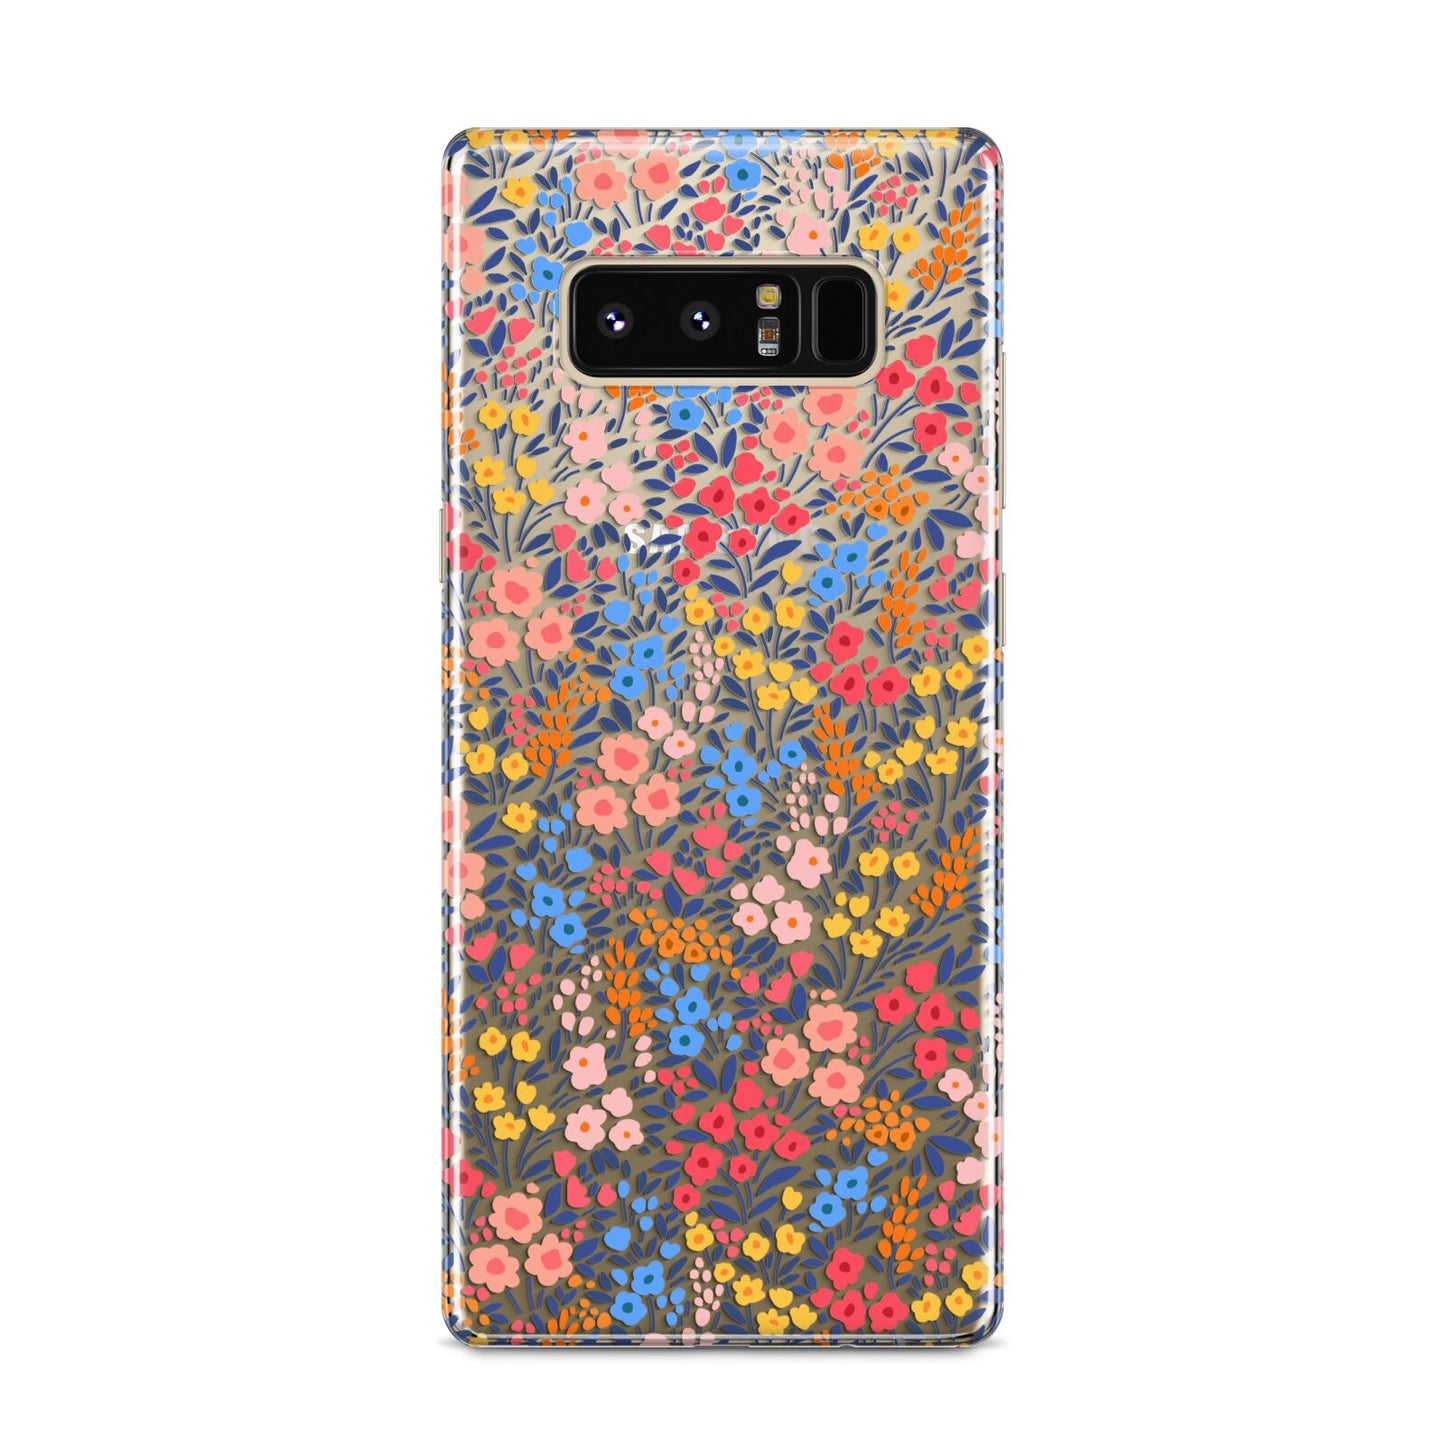 Small Flowers Samsung Galaxy S8 Case